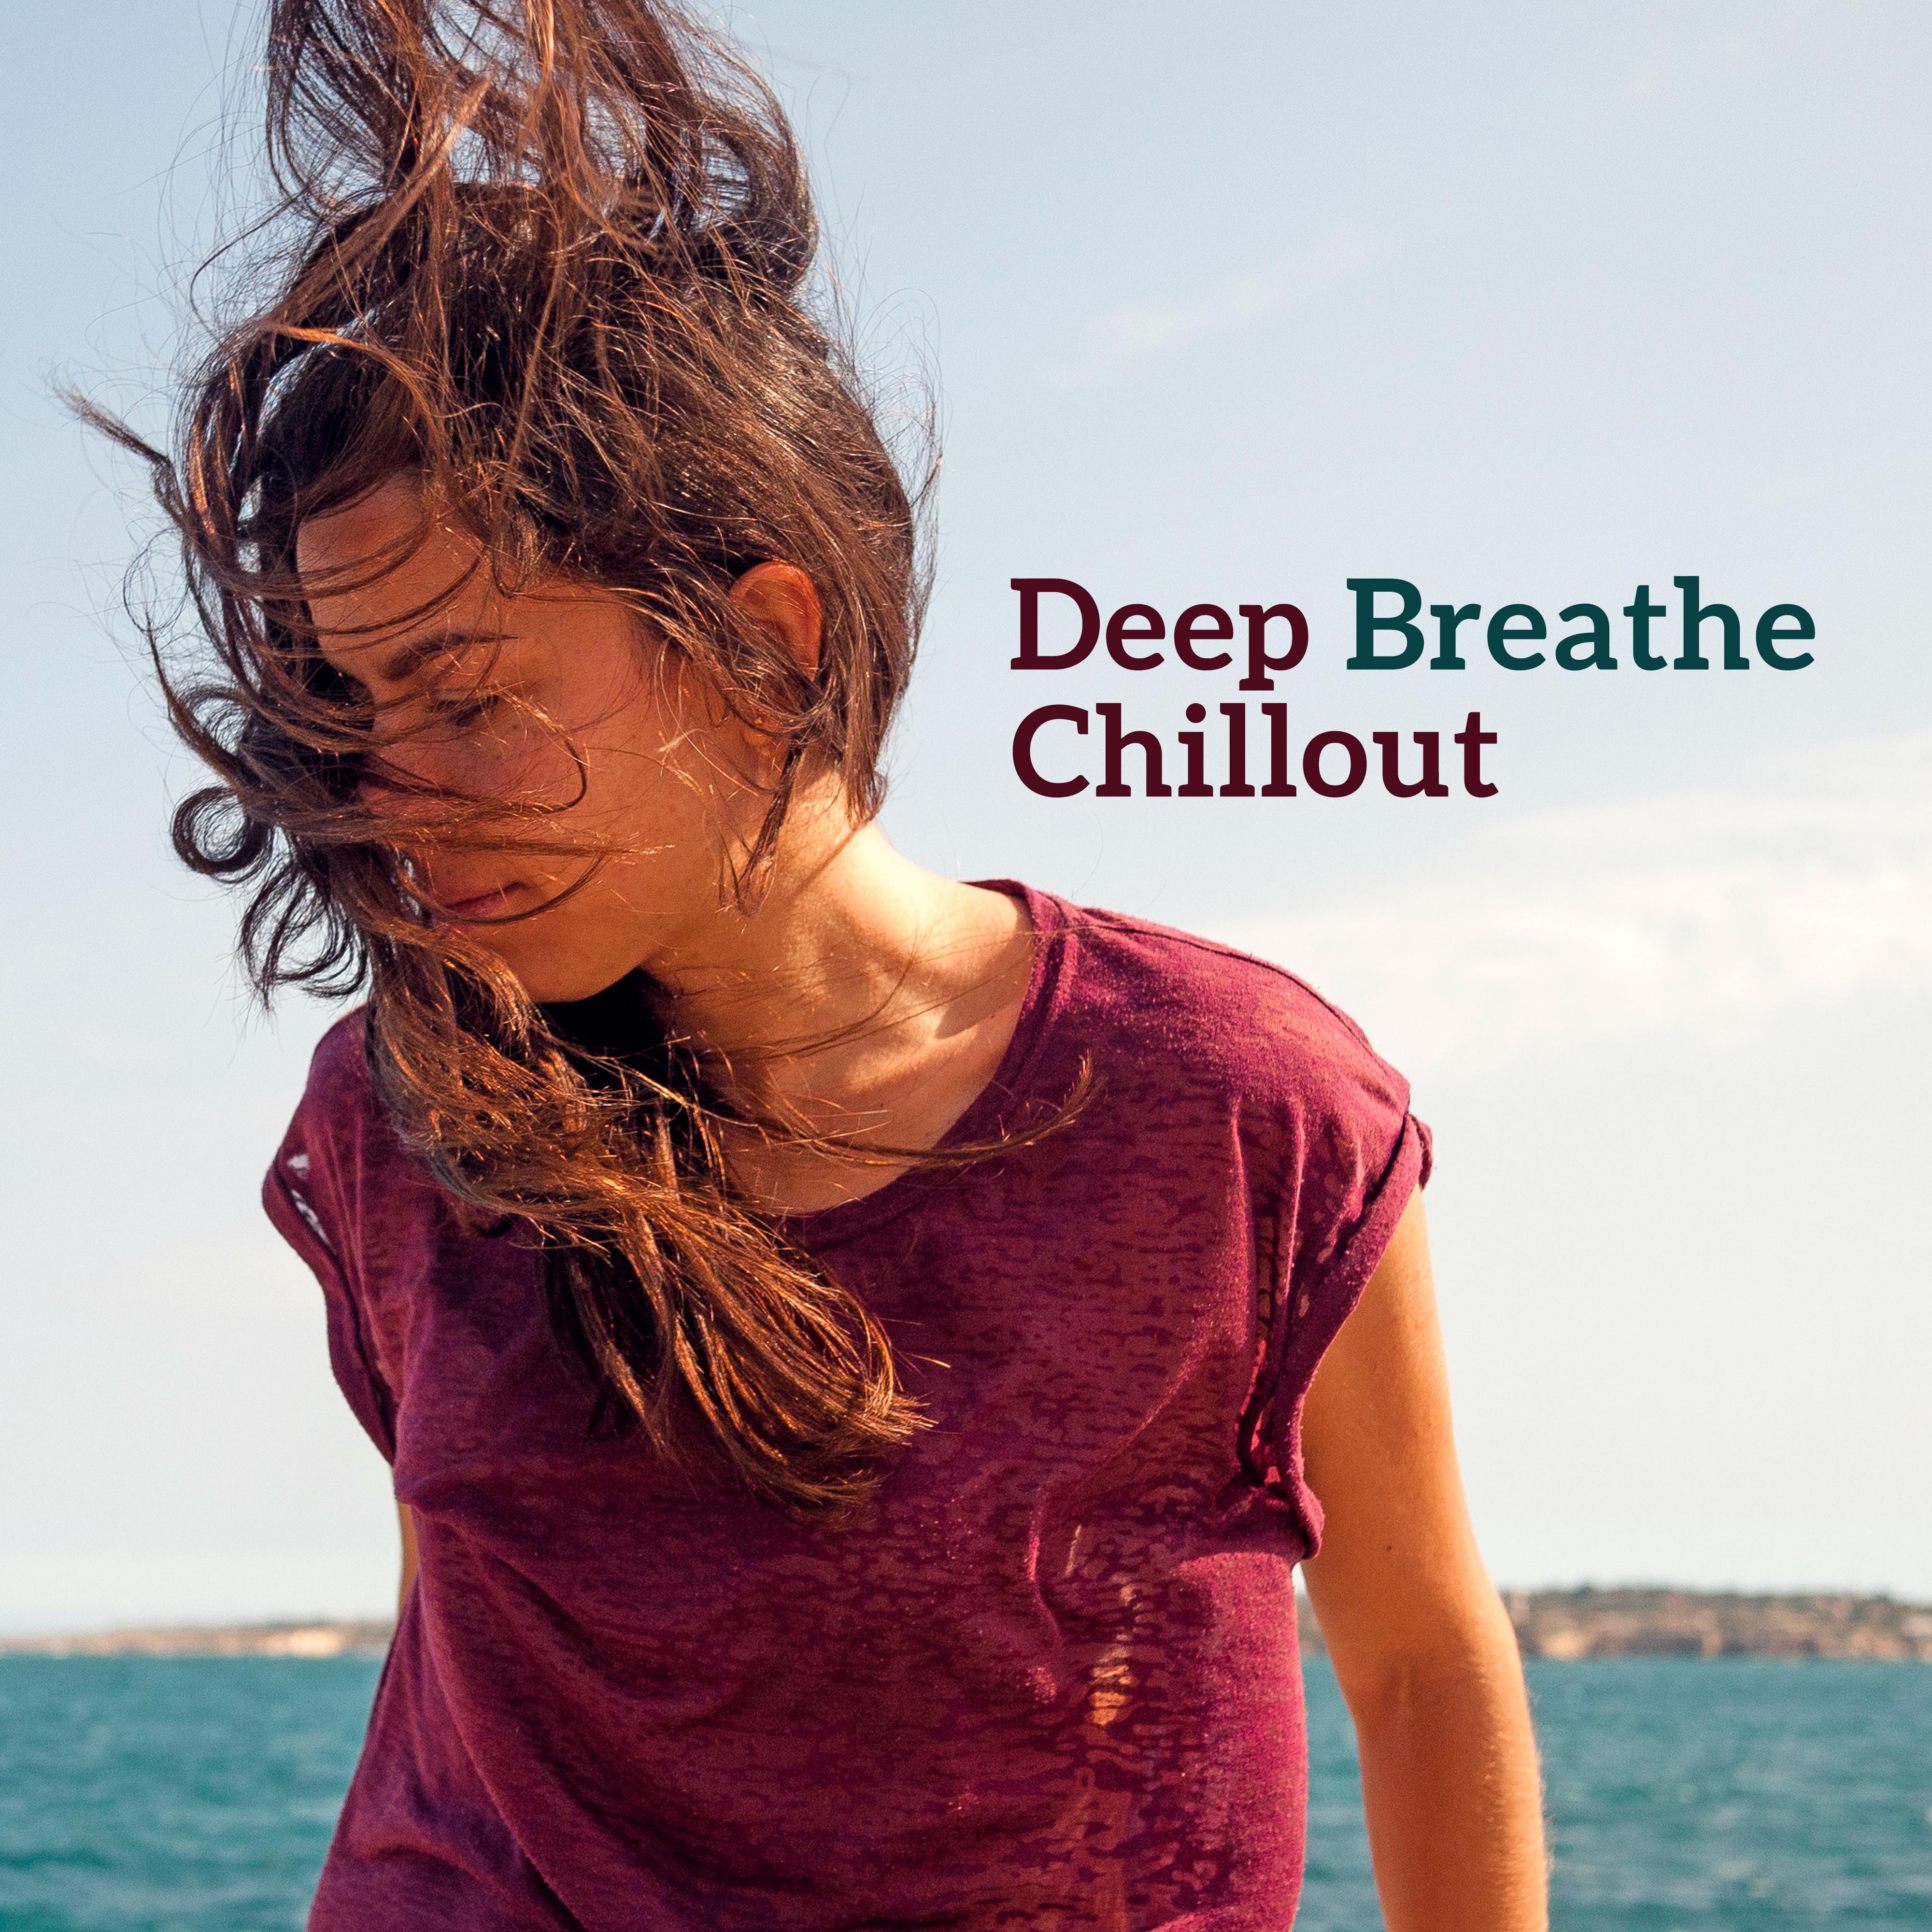 Deep Breathe Chillout  Chill Out Music, Relax  Chill, Essential Vibes